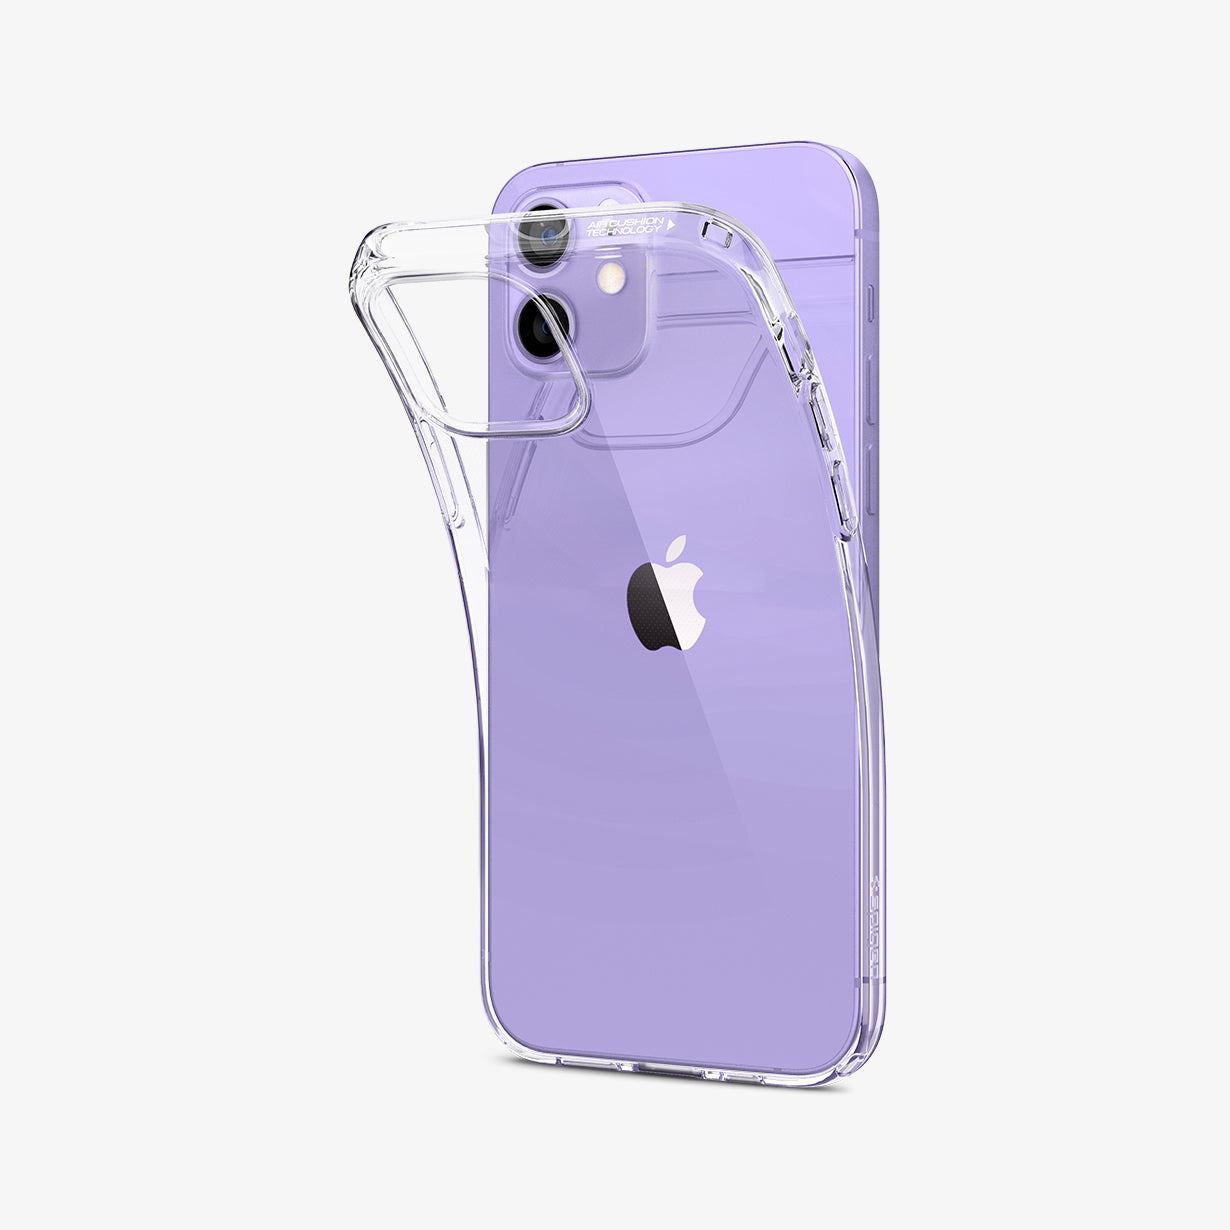 ACS01697 - iPhone 12 / 12 Pro Case Liquid Crystal in crystal clear showing the back and partial side with case bending away from device